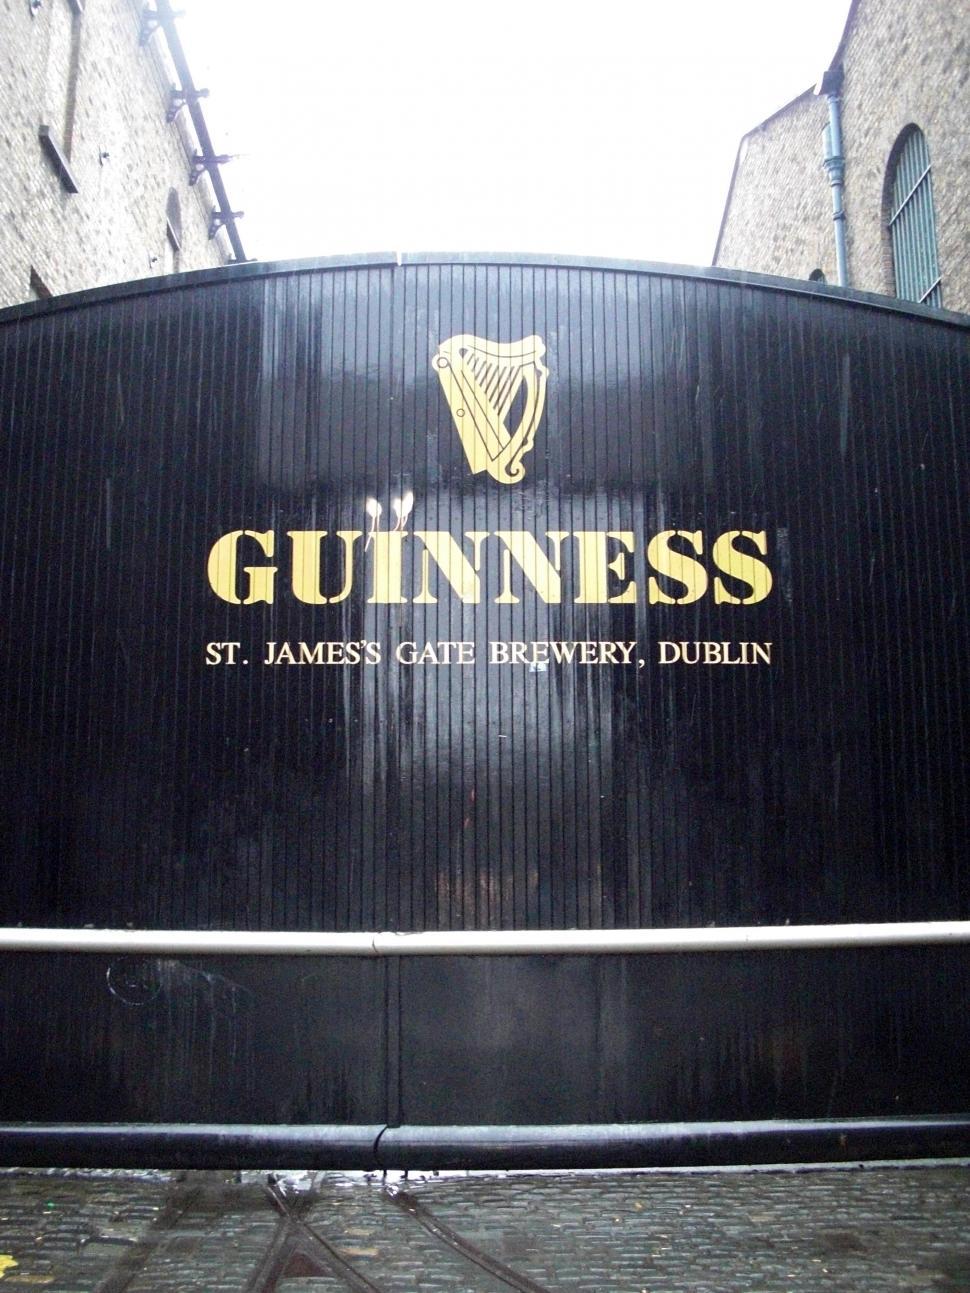 Free Image of Guinness Sign on Side of Building 